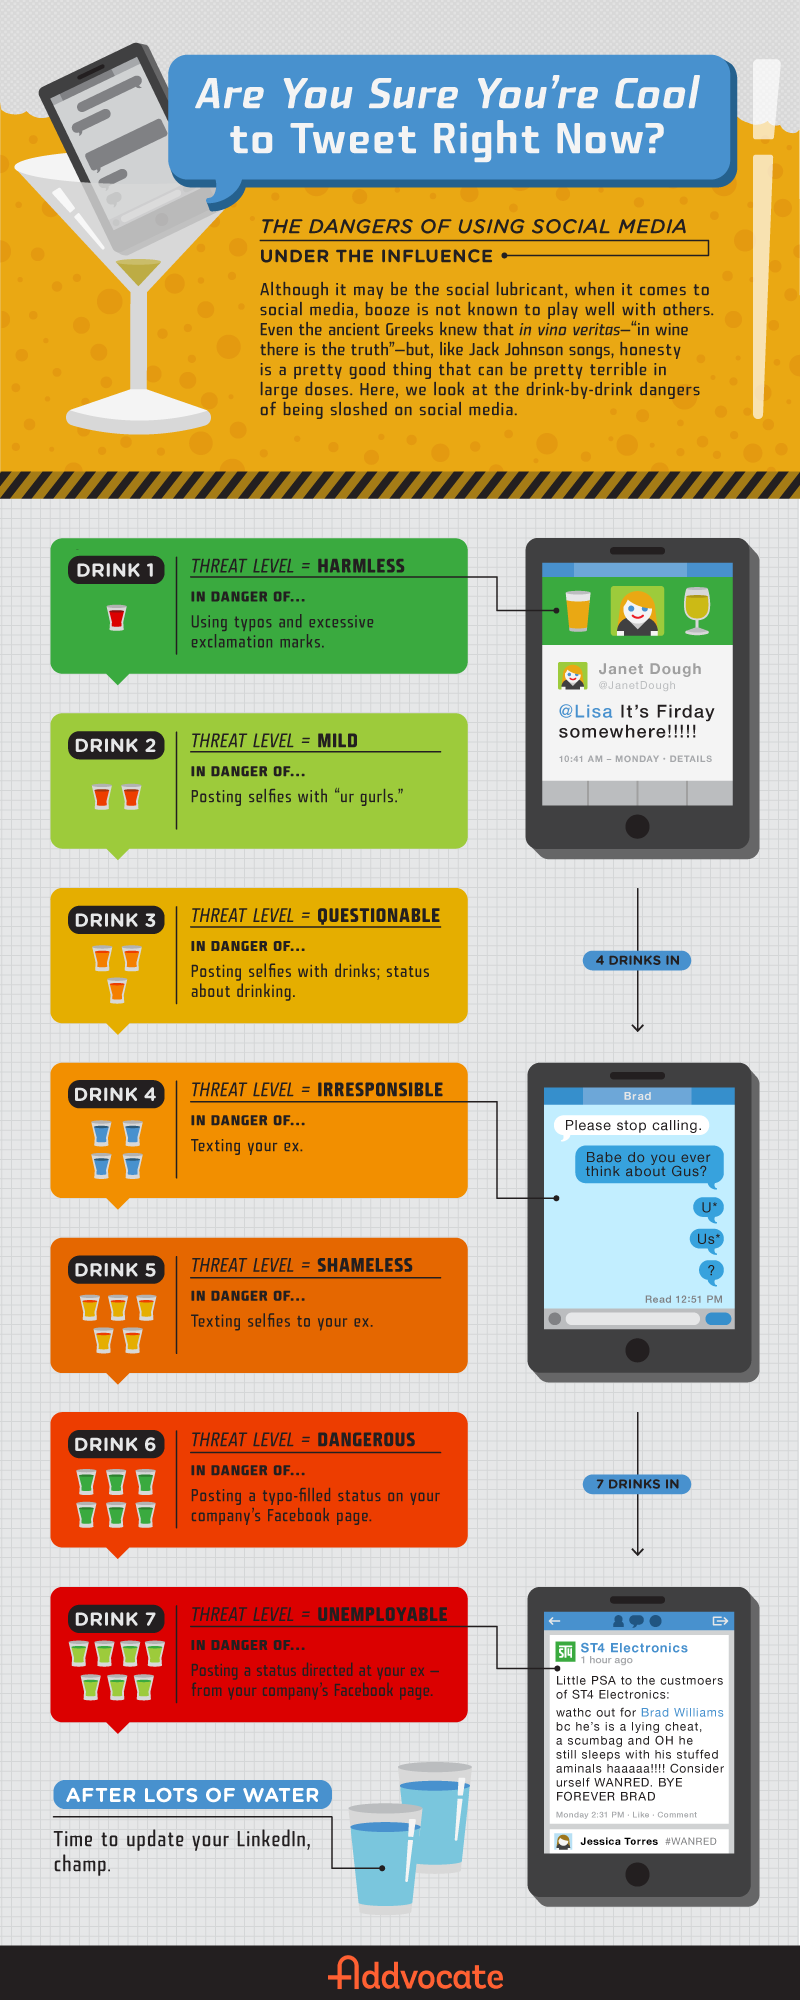 Are You Sure You're Cool To Tweet Right Now? The Dangers of Using Social Media Under the Influence infographic